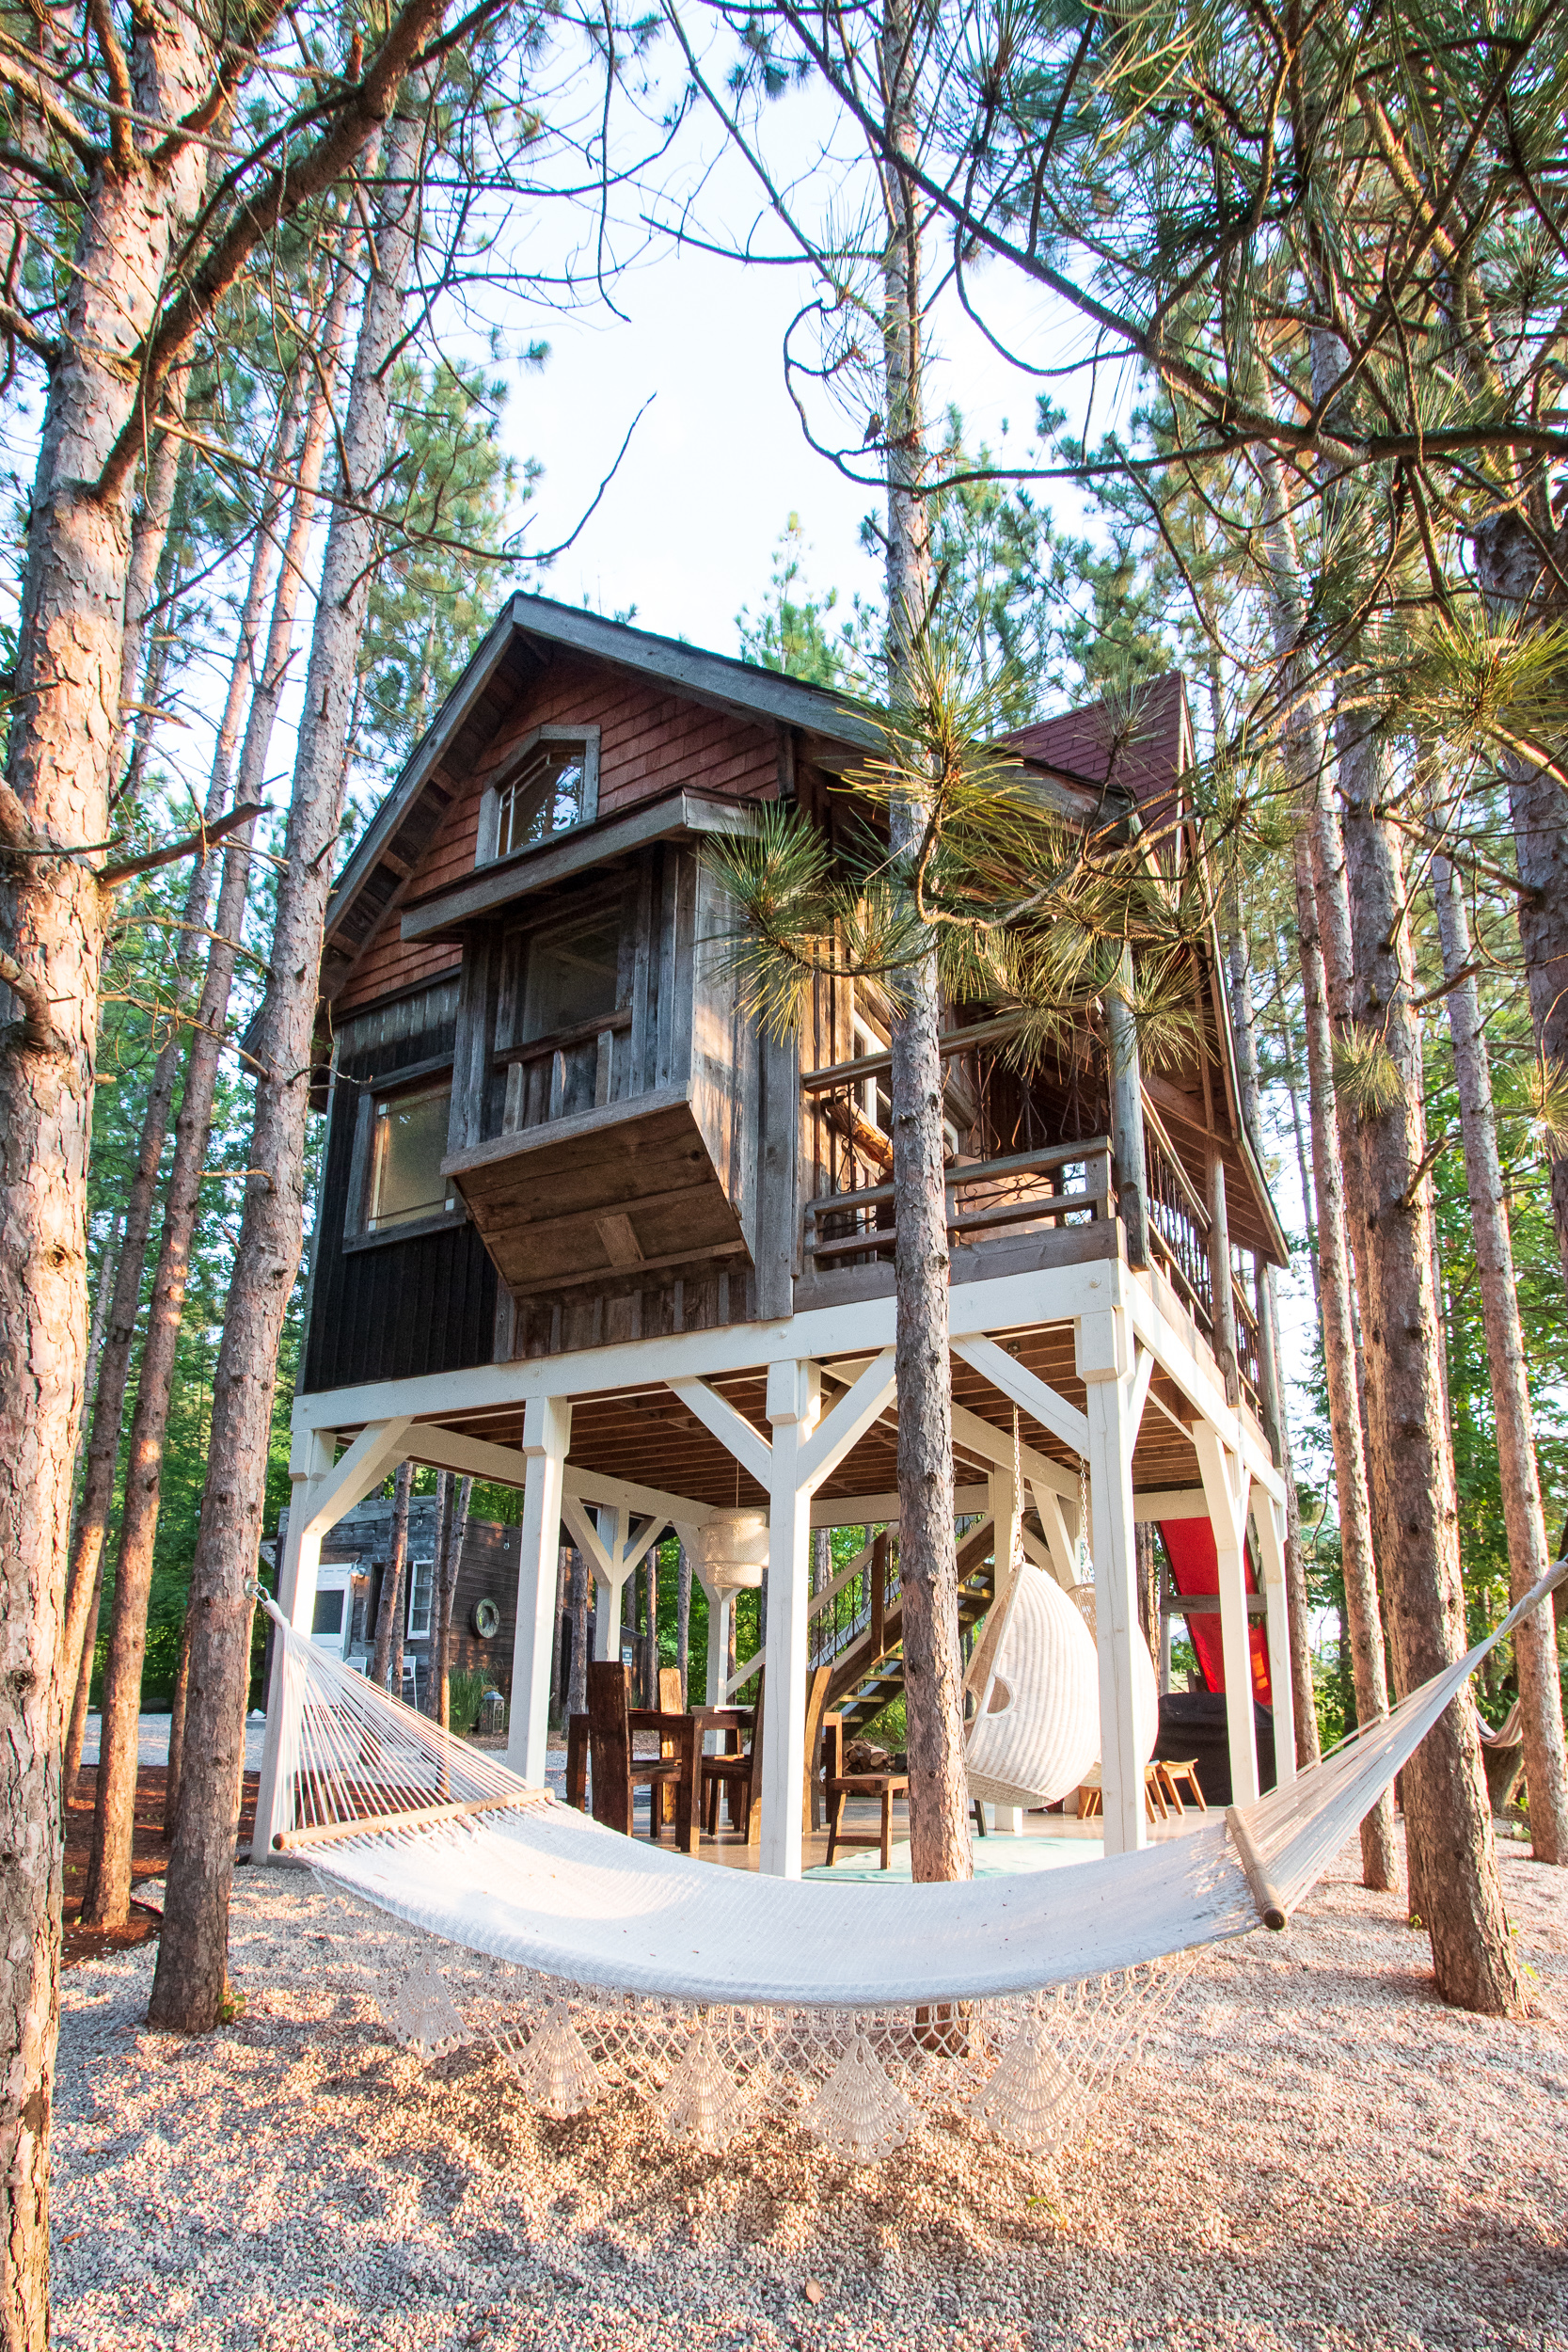  Treehouse  Retreat Lynne Knowlton 38 Design The Life You Want To Live 